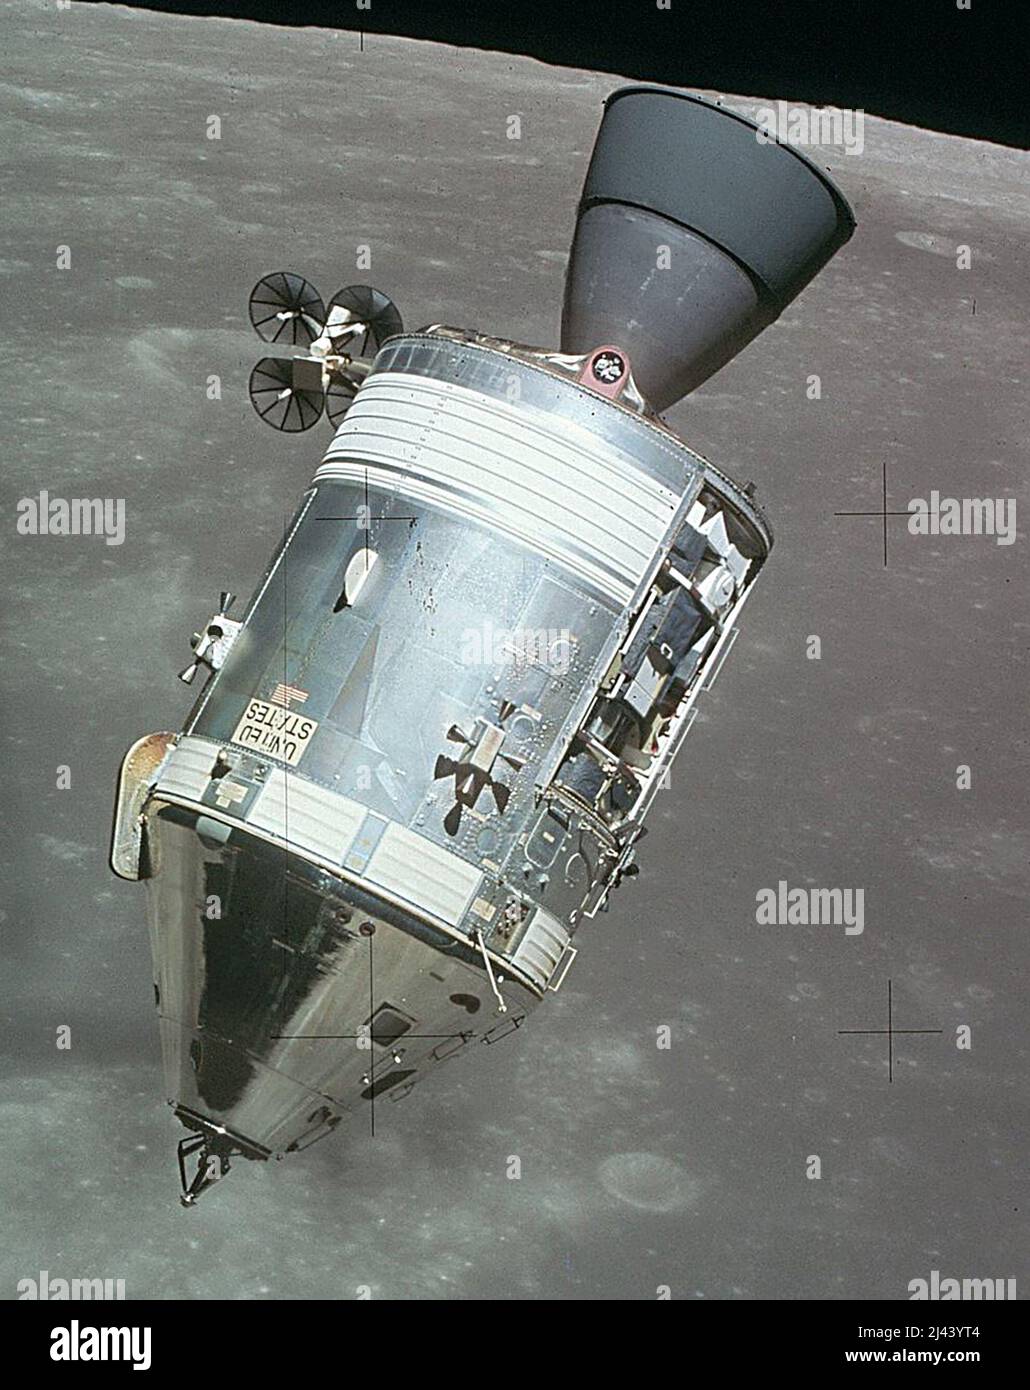 The Apollo 15 command and service module in lunar orbit, photographed from Falcon Stock Photo